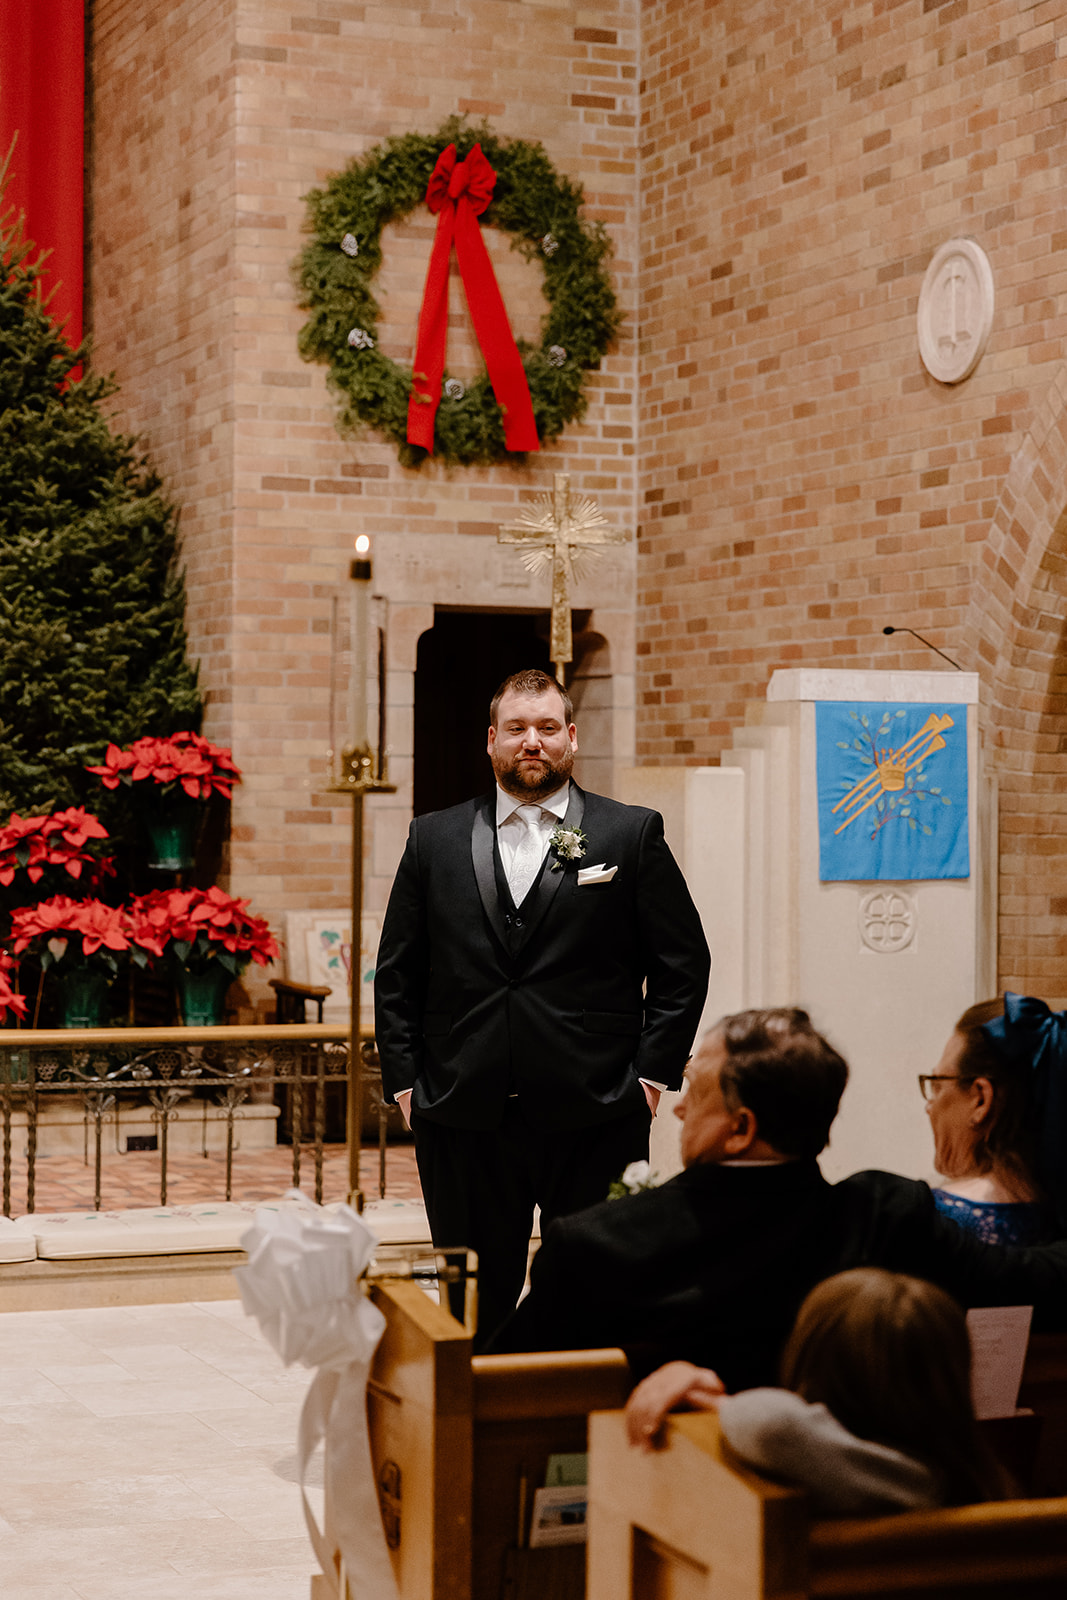 Groom at the end of the aisle